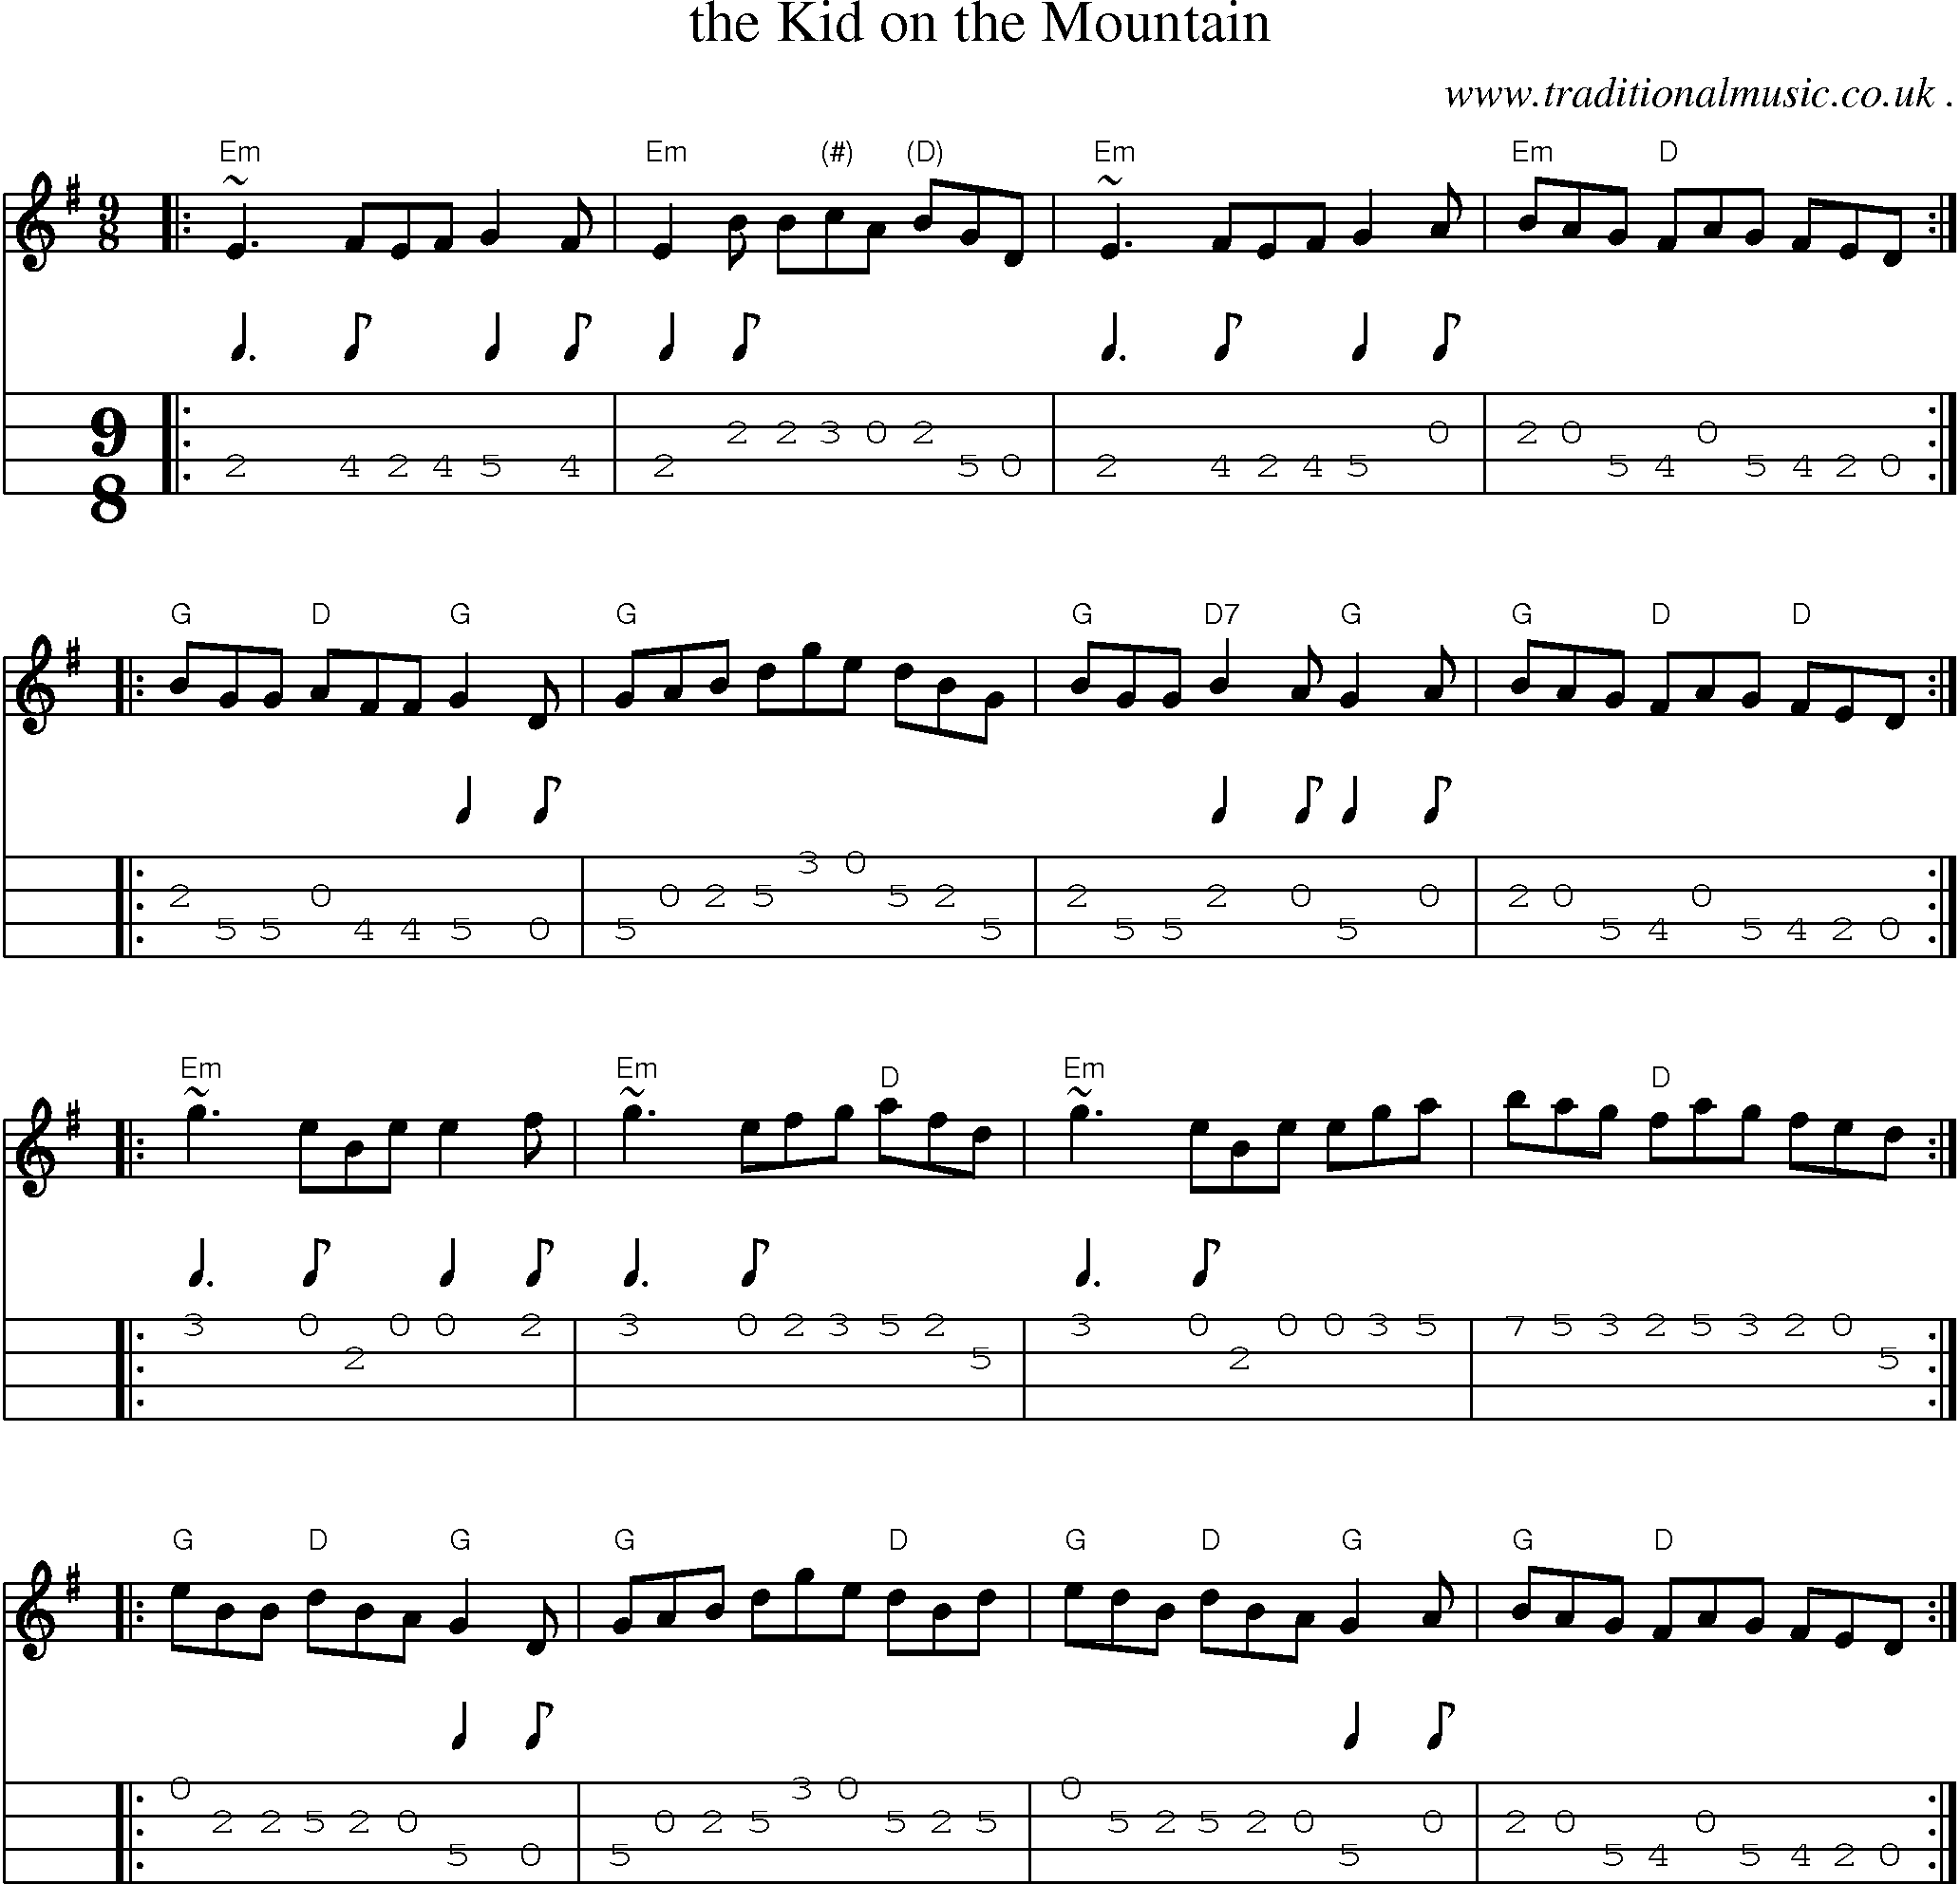 Sheet-music  score, Chords and Mandolin Tabs for The Kid On The Mountain